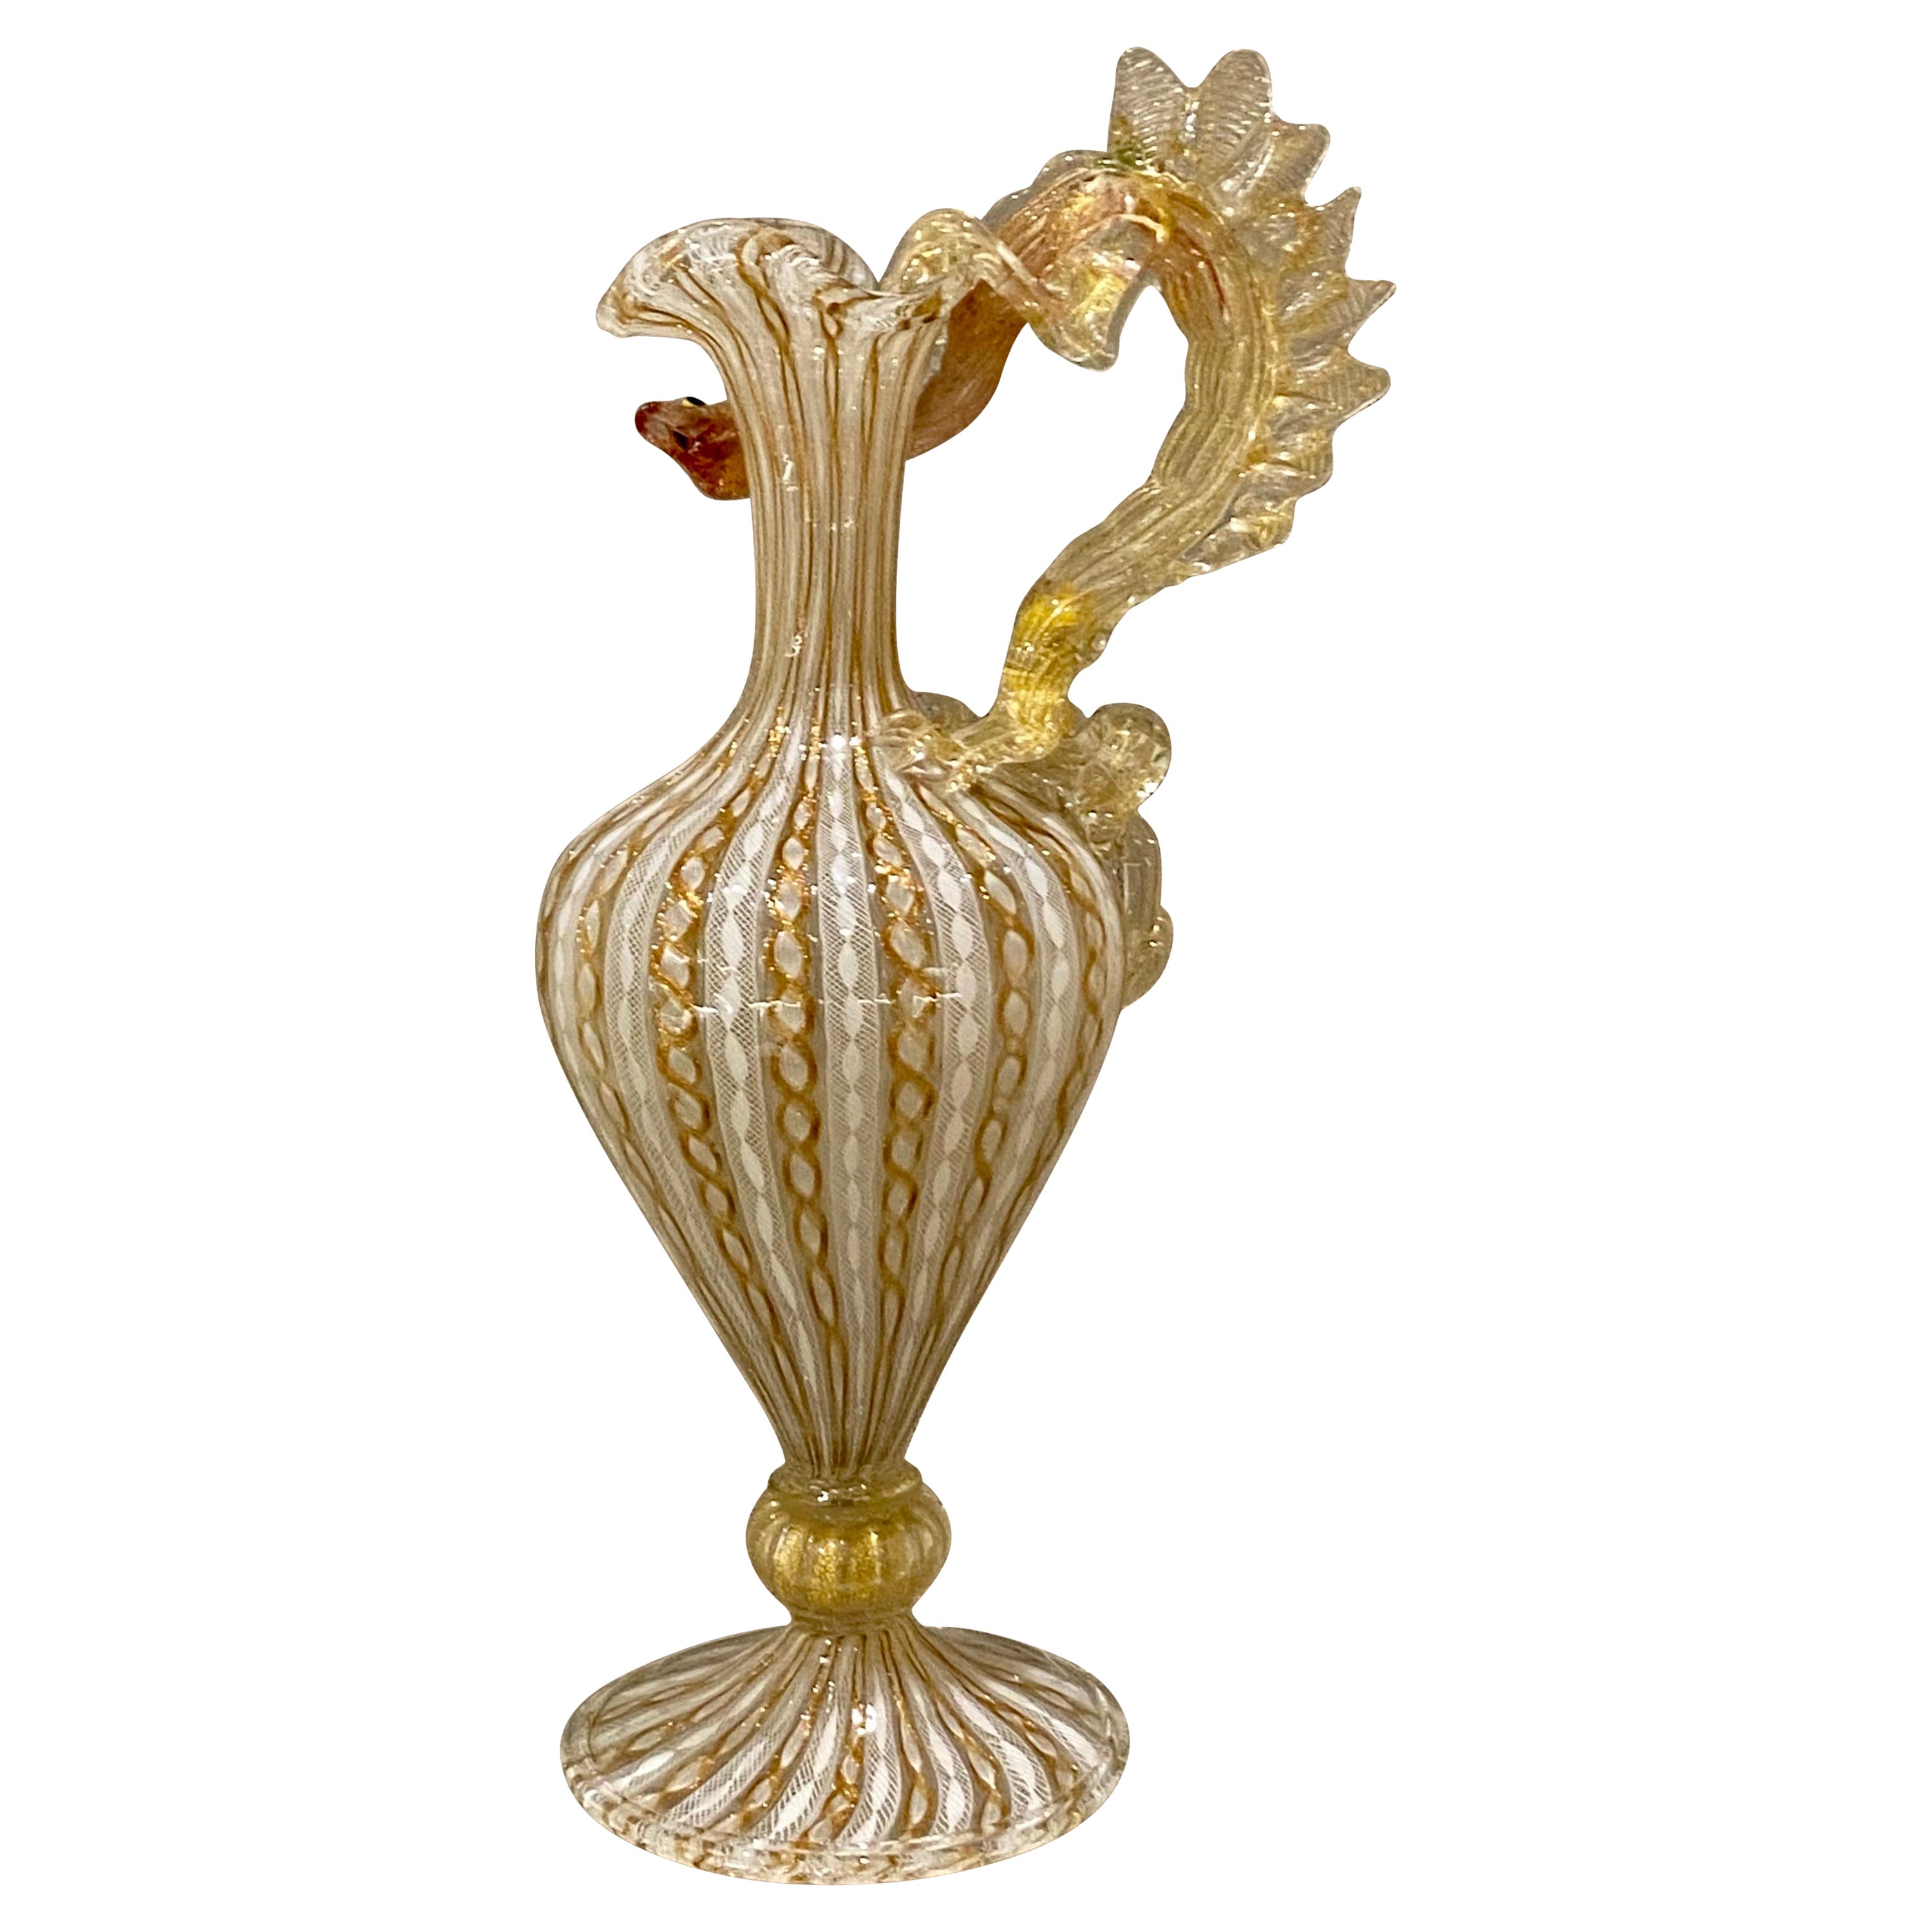 A superb quality 19th century Venetian glass claret jug - Ewer with alternating strands of opaque latticino and aventurine, the handle modelled as a dragon, 14.7 inches (37.5cm) tall by 6 inches (16.3cm) wide.
This is presented in immaculate